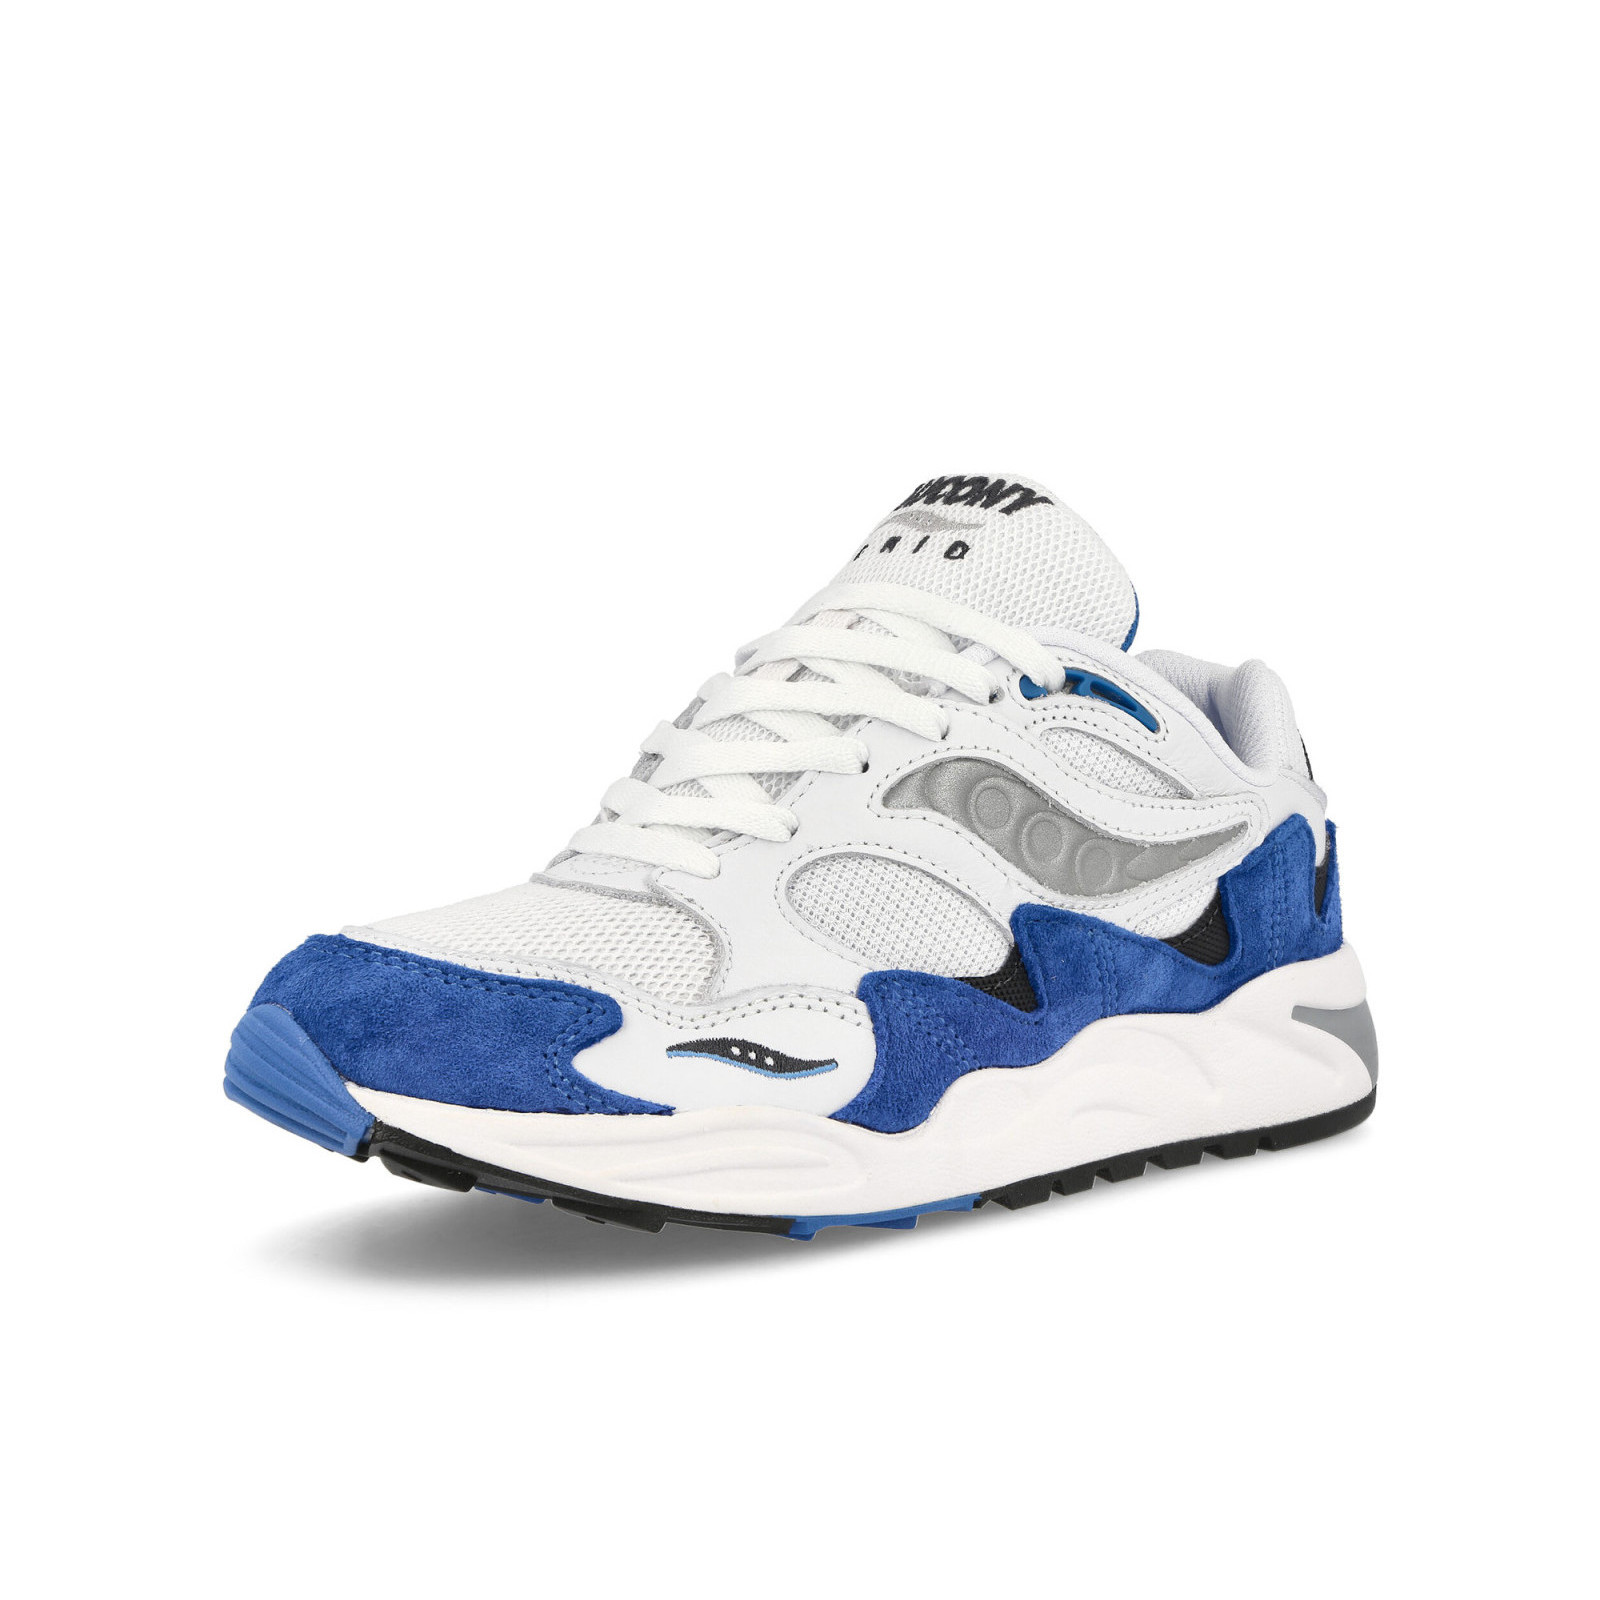 Saucony Grid Shadow 2
White / Blue